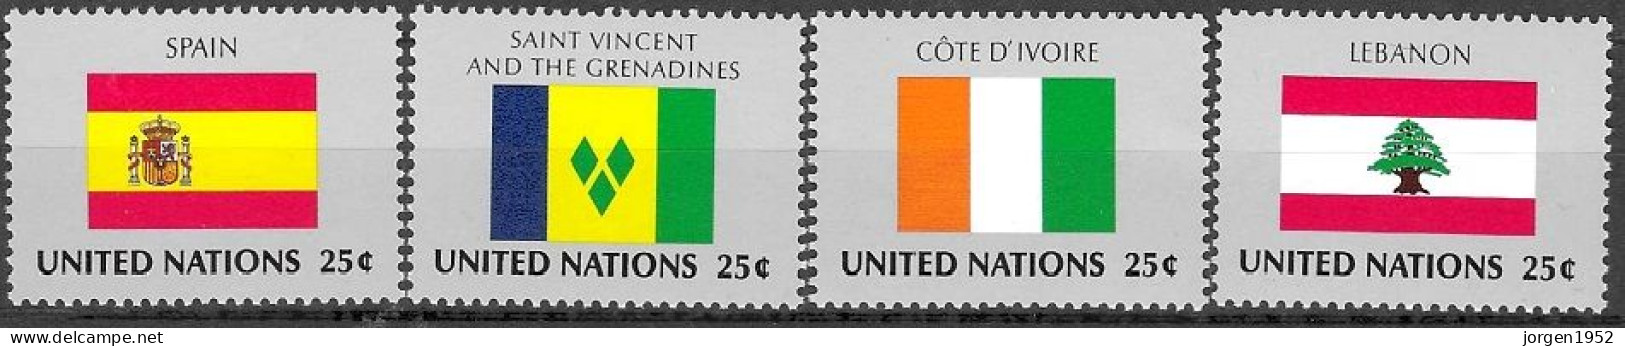 UNITED NATIONS # NEW YORK FROM 1988 STAMPWORLD 553-56** - New York/Geneva/Vienna Joint Issues